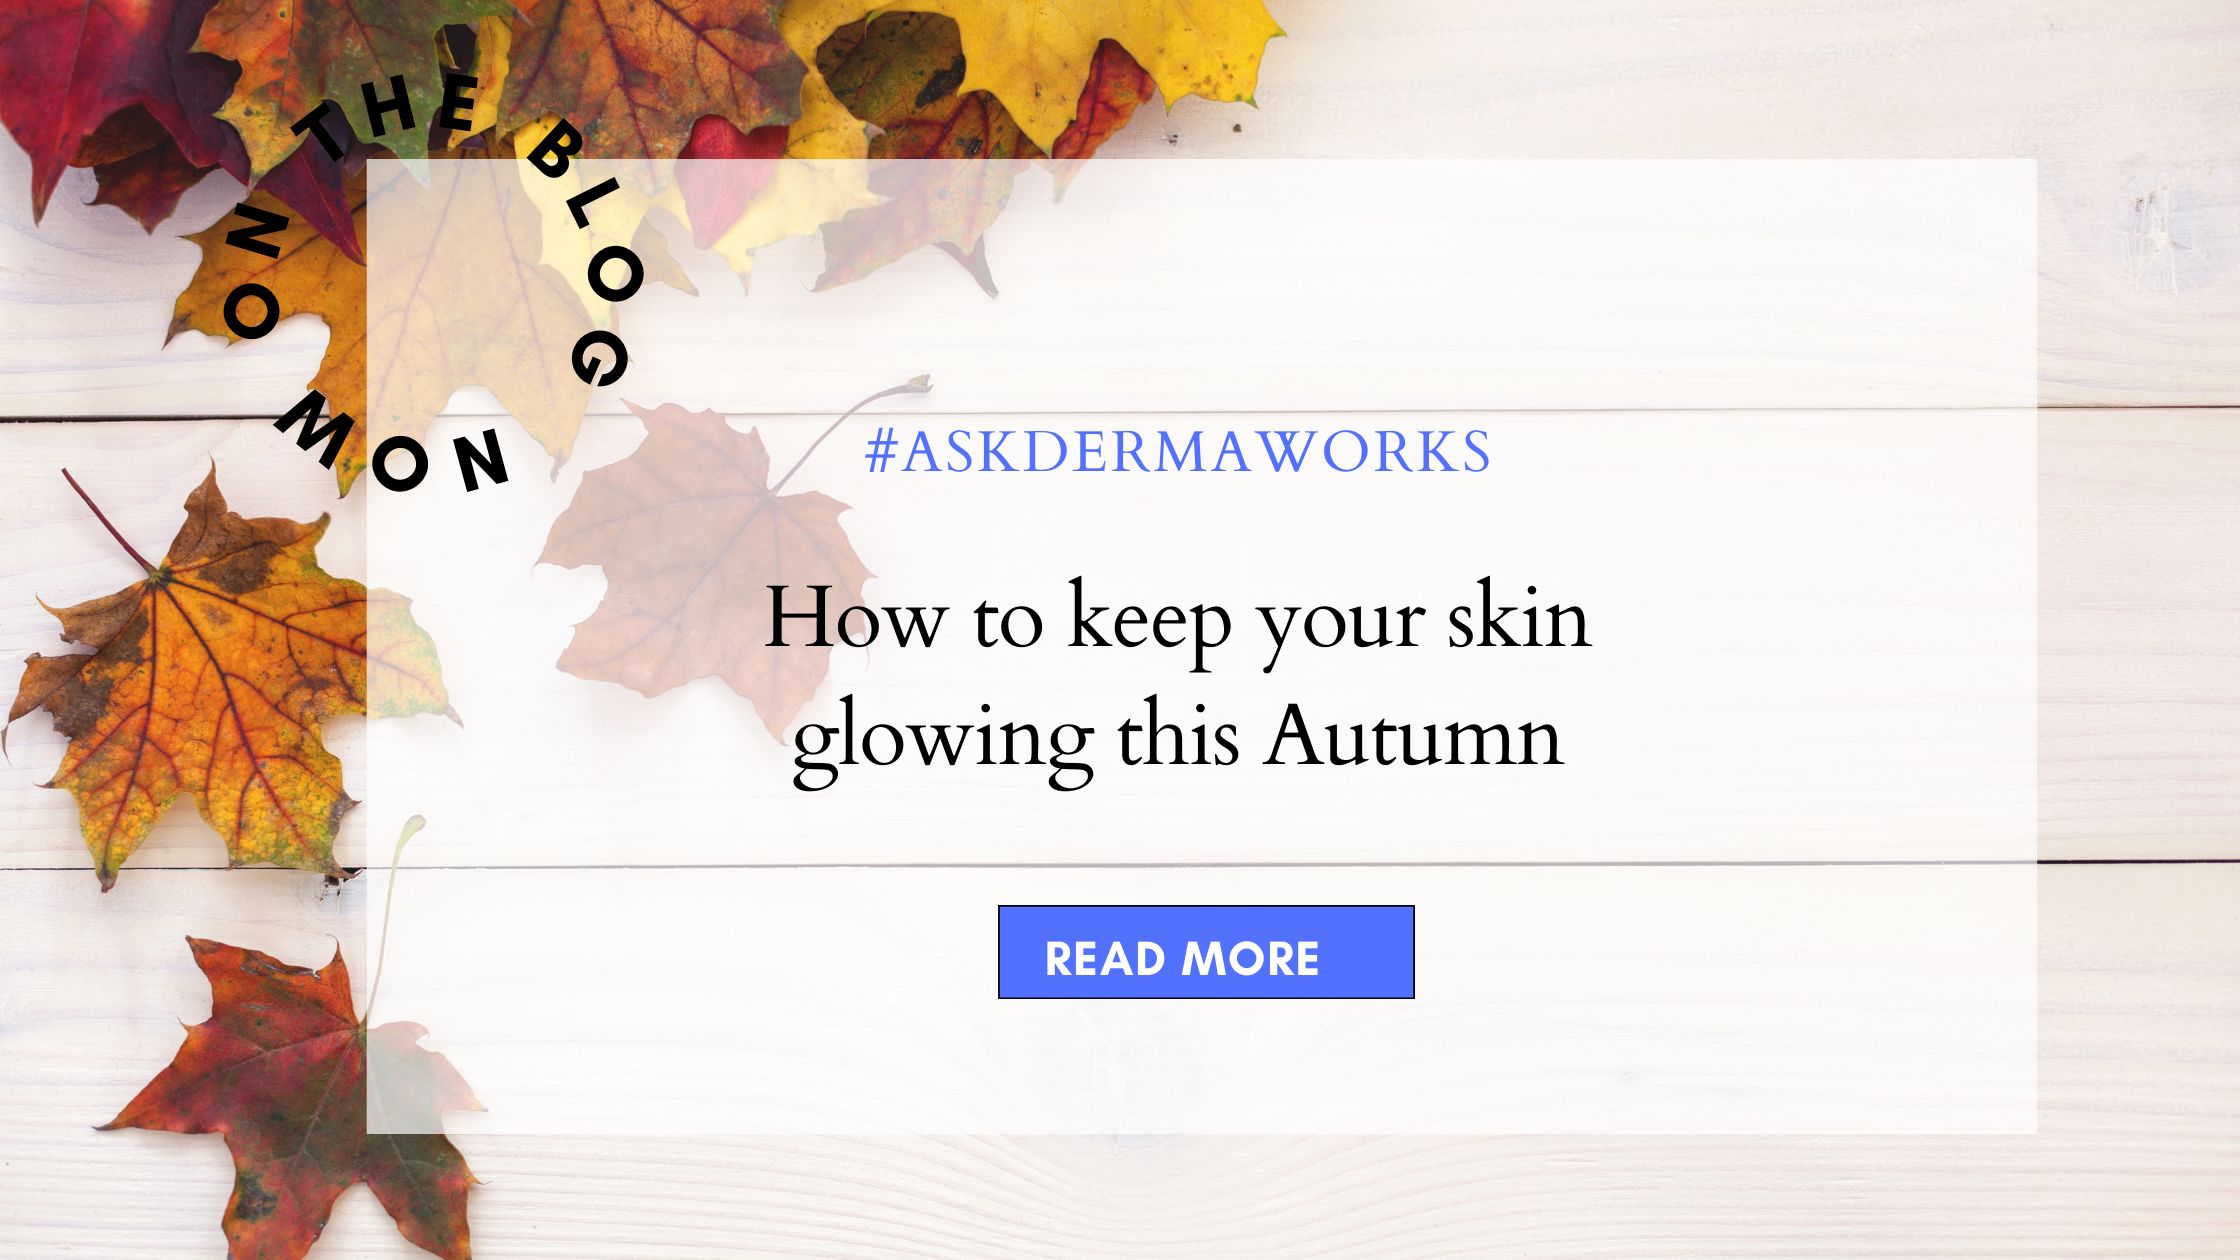 How to keep your skin glowing and hydrated during Autumn